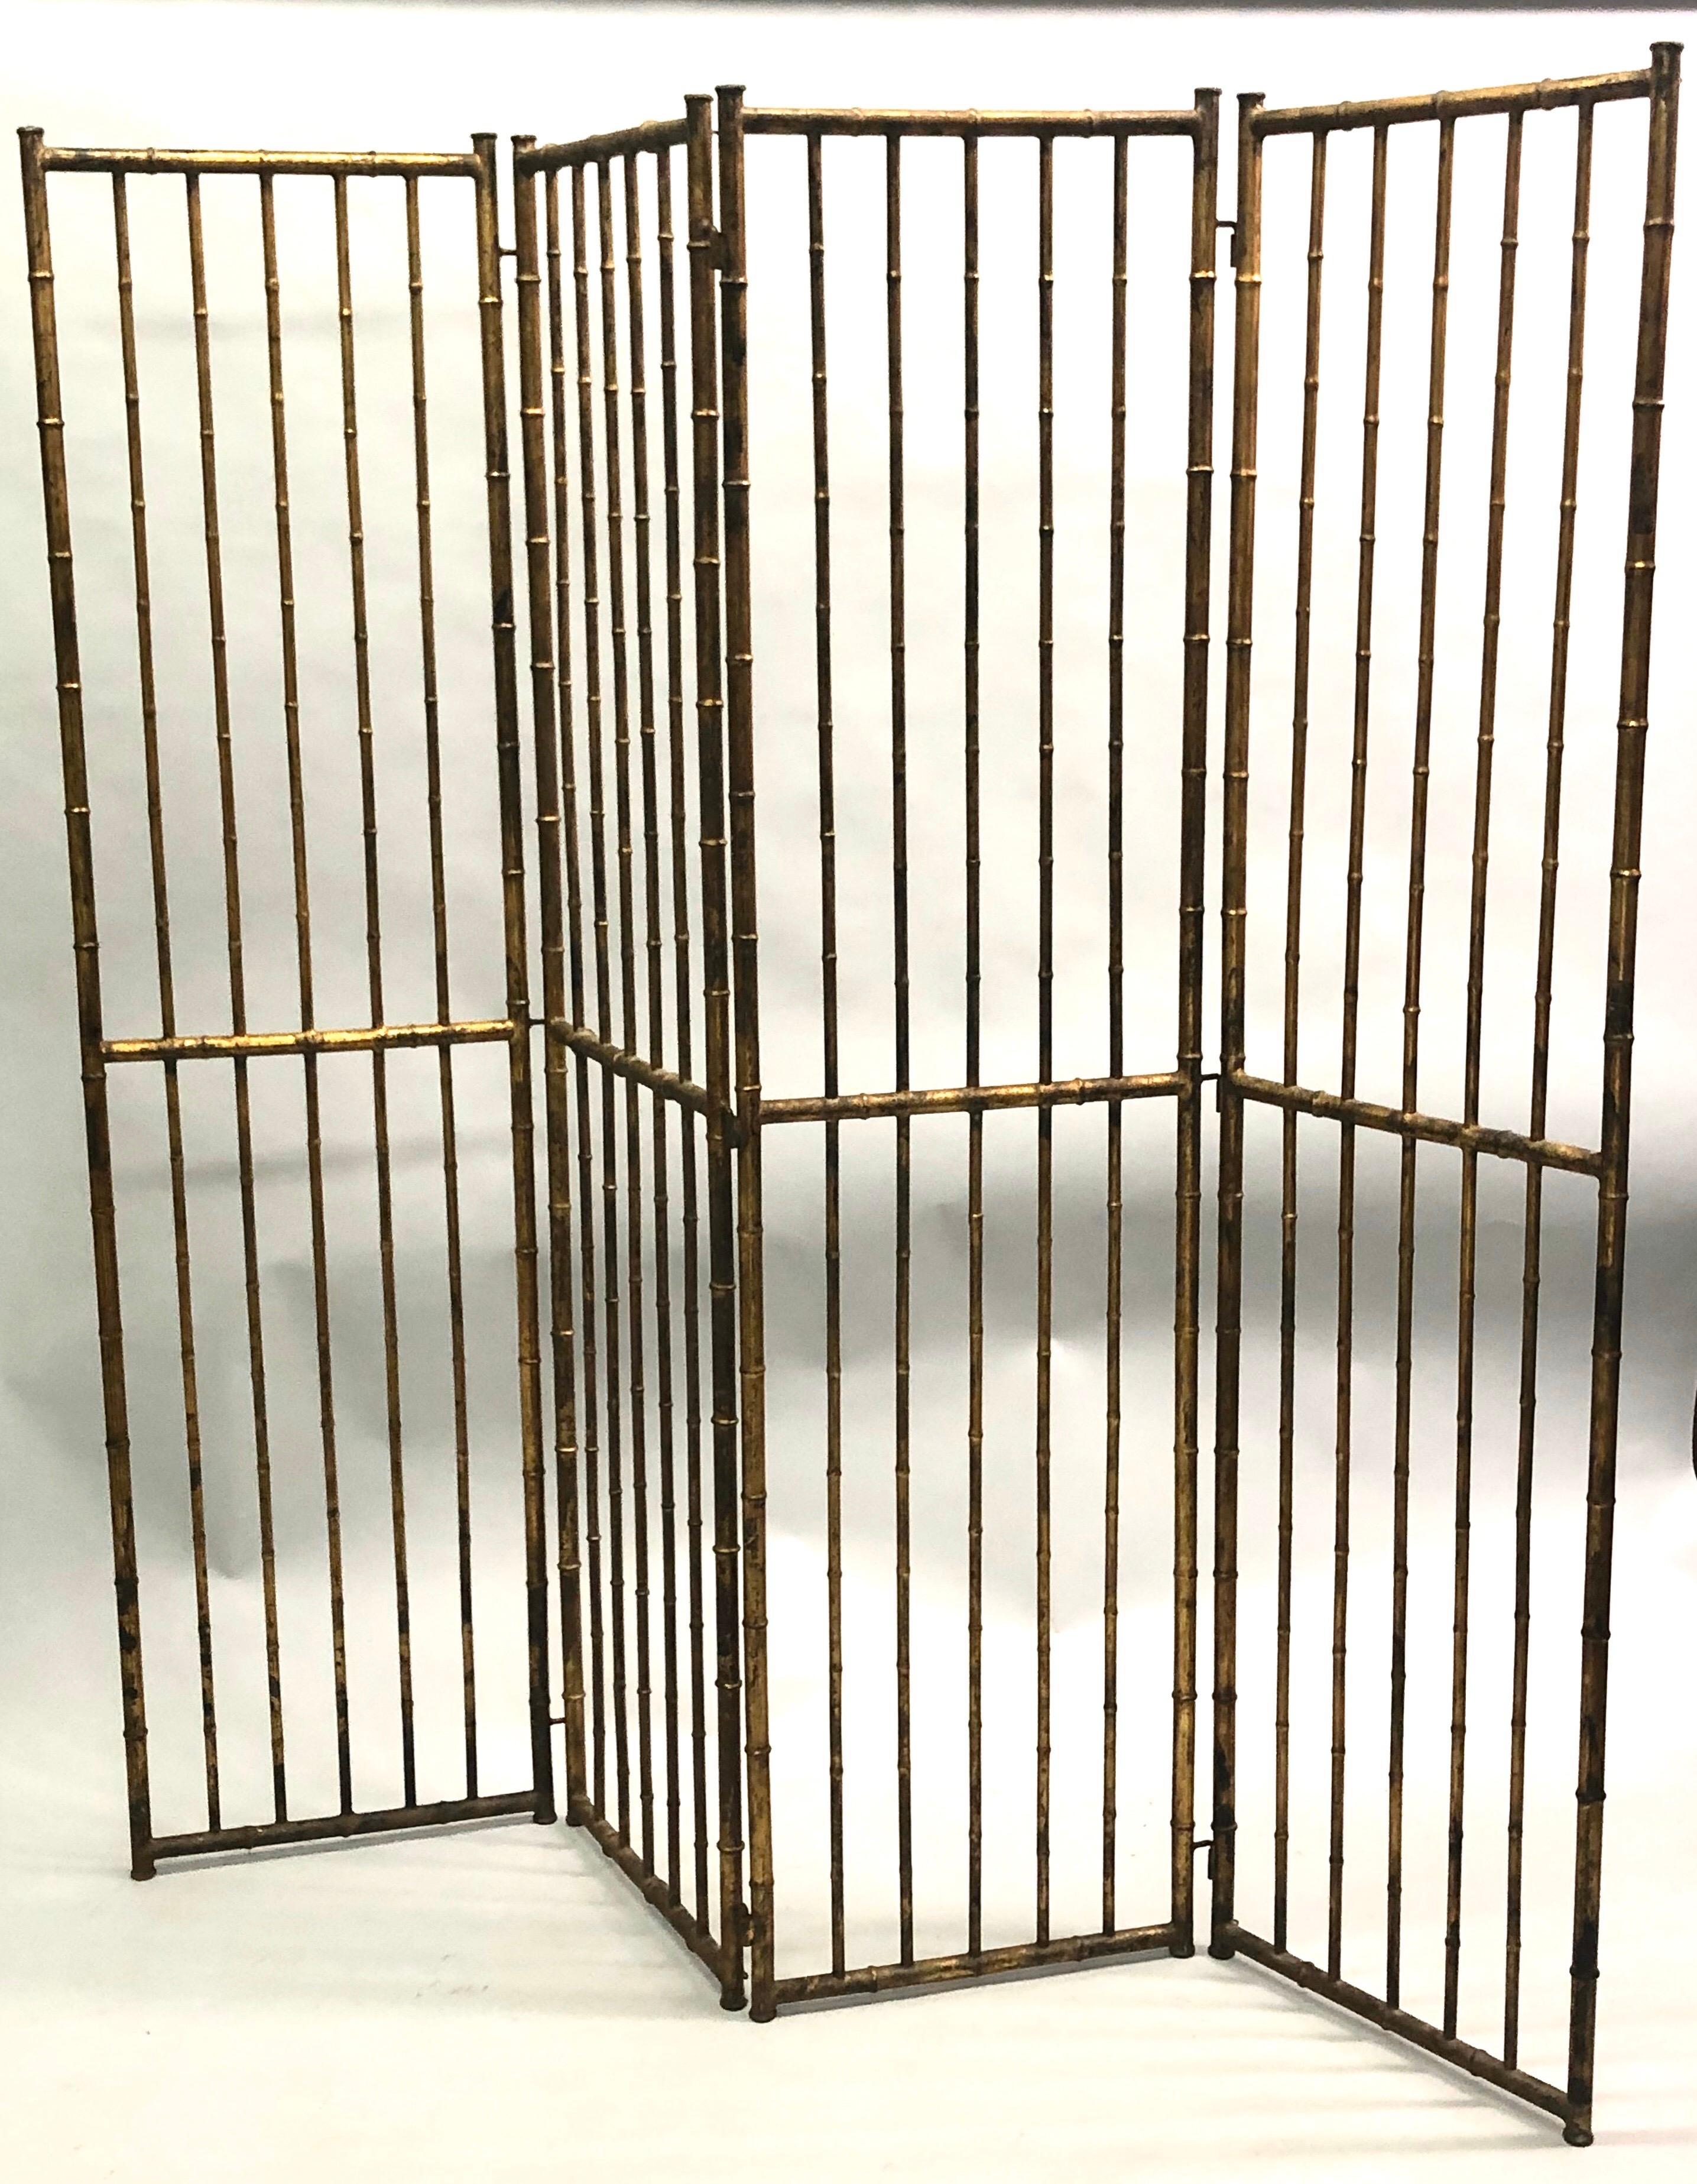 20th Century French Mid-Century Modern Neoclassical Faux Bamboo Gilt Iron Screen by Bagues For Sale